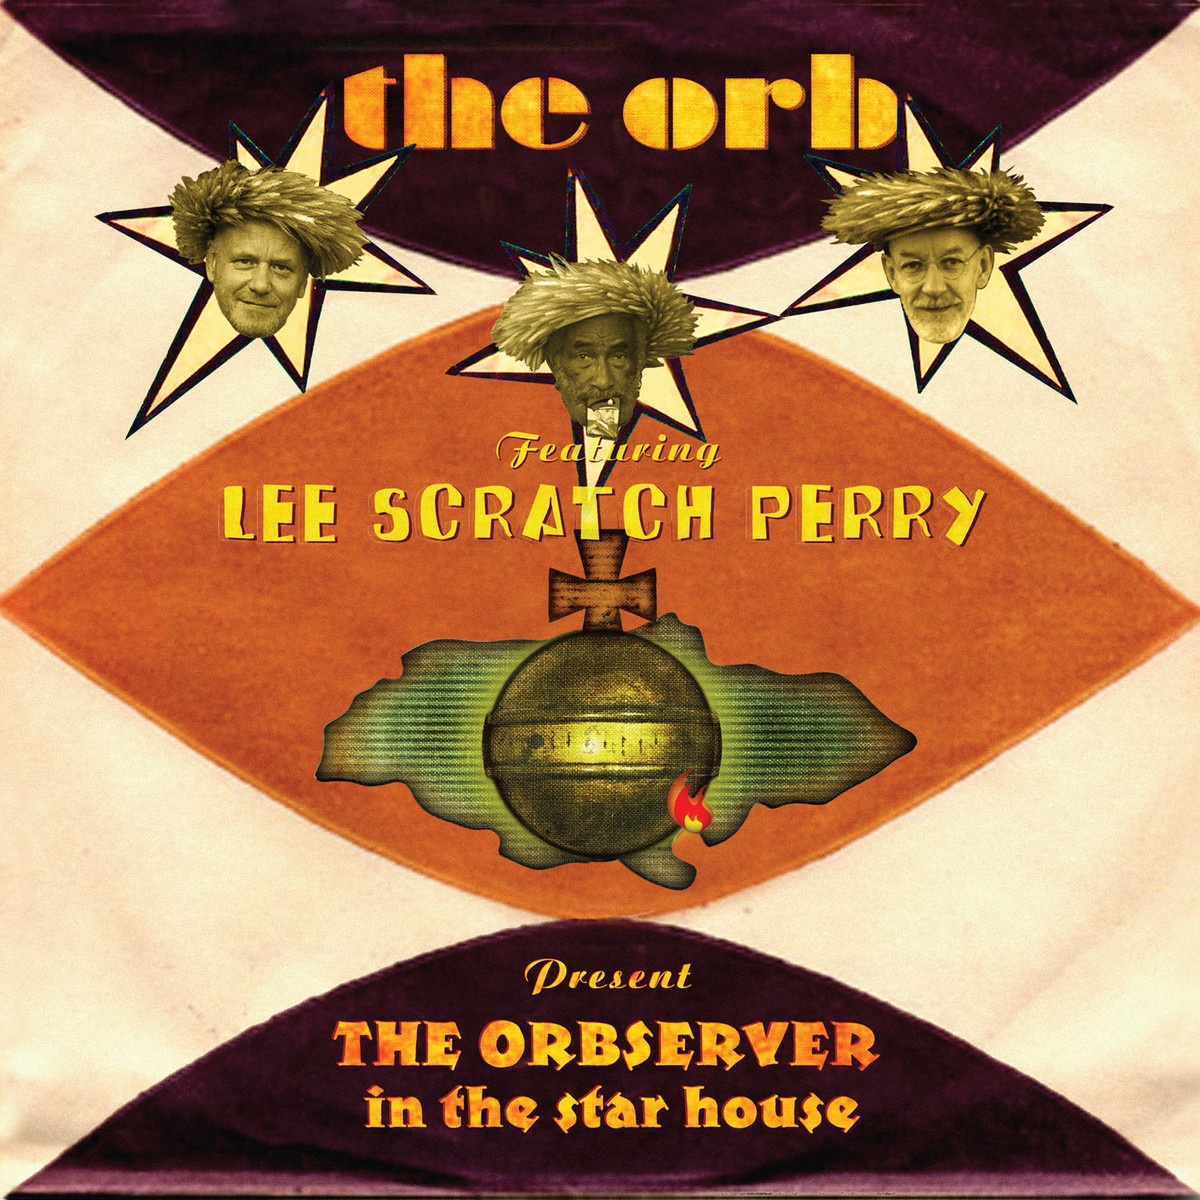 Presents the Orbserver in the Star House